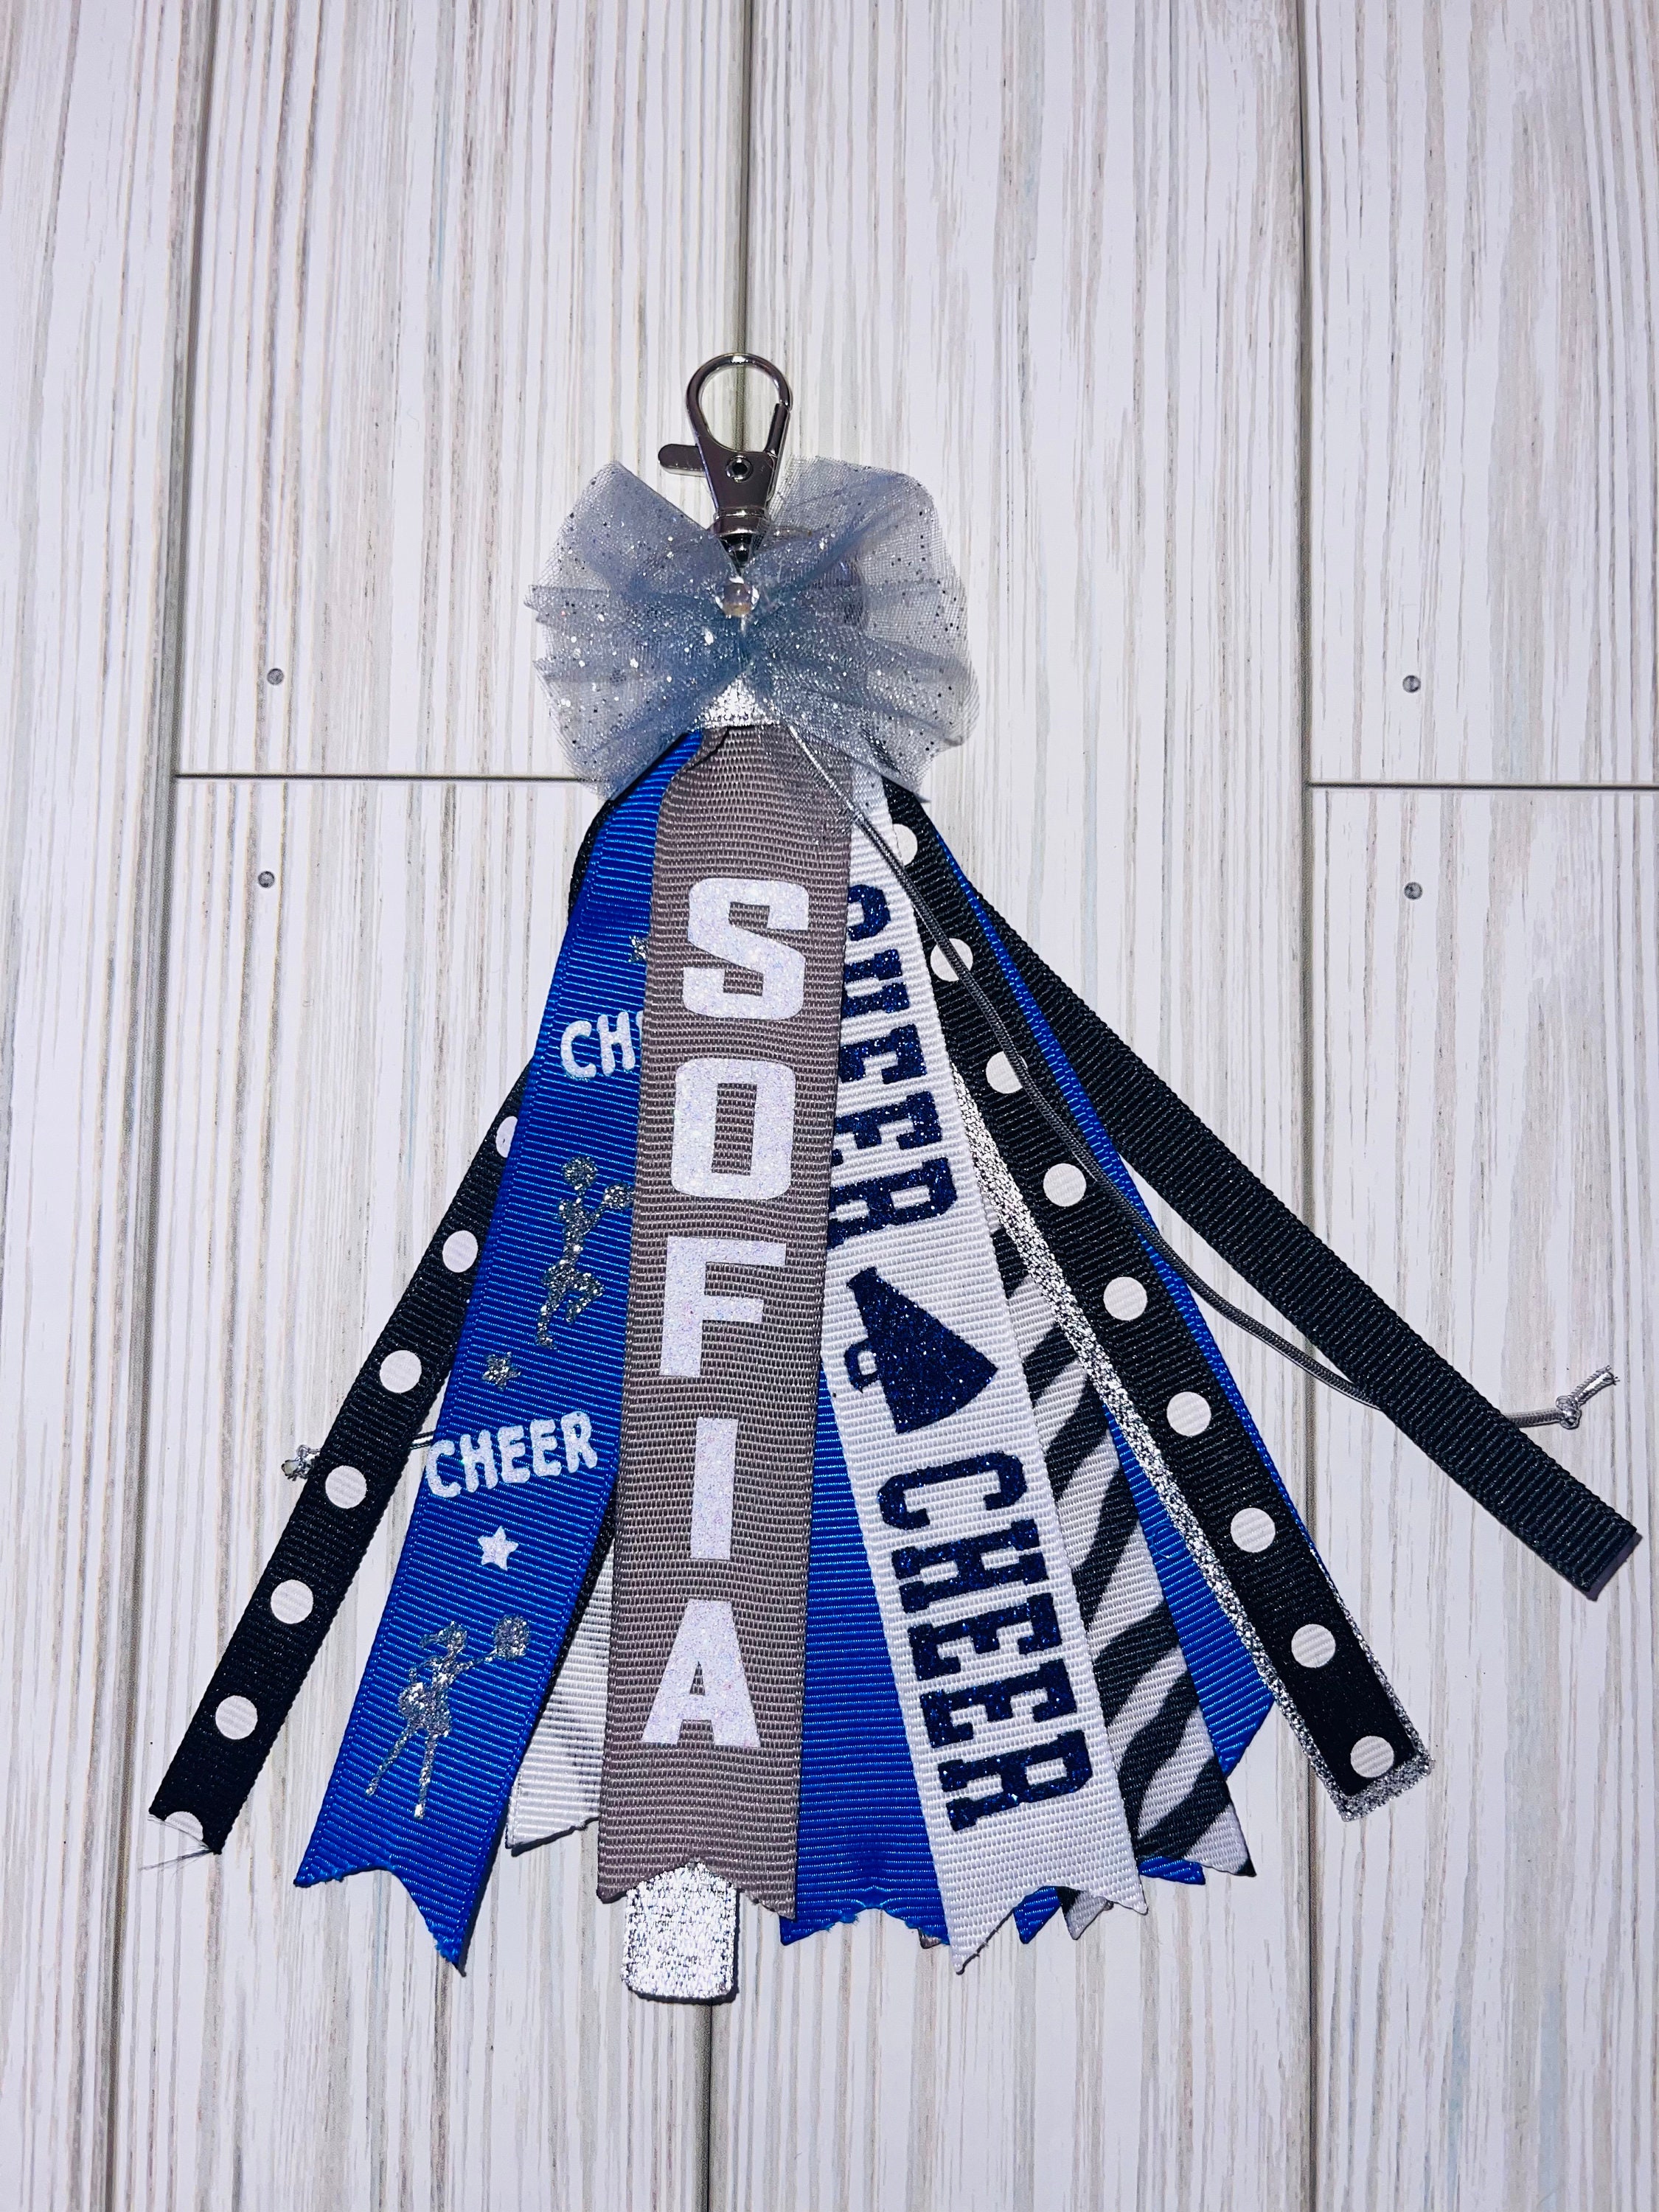 Personalized Cheer or Dance Zipper Pull Zipper Bag Tag Backpack Charm Cheer  Pull up Dance Pull up Ribbon Charm 